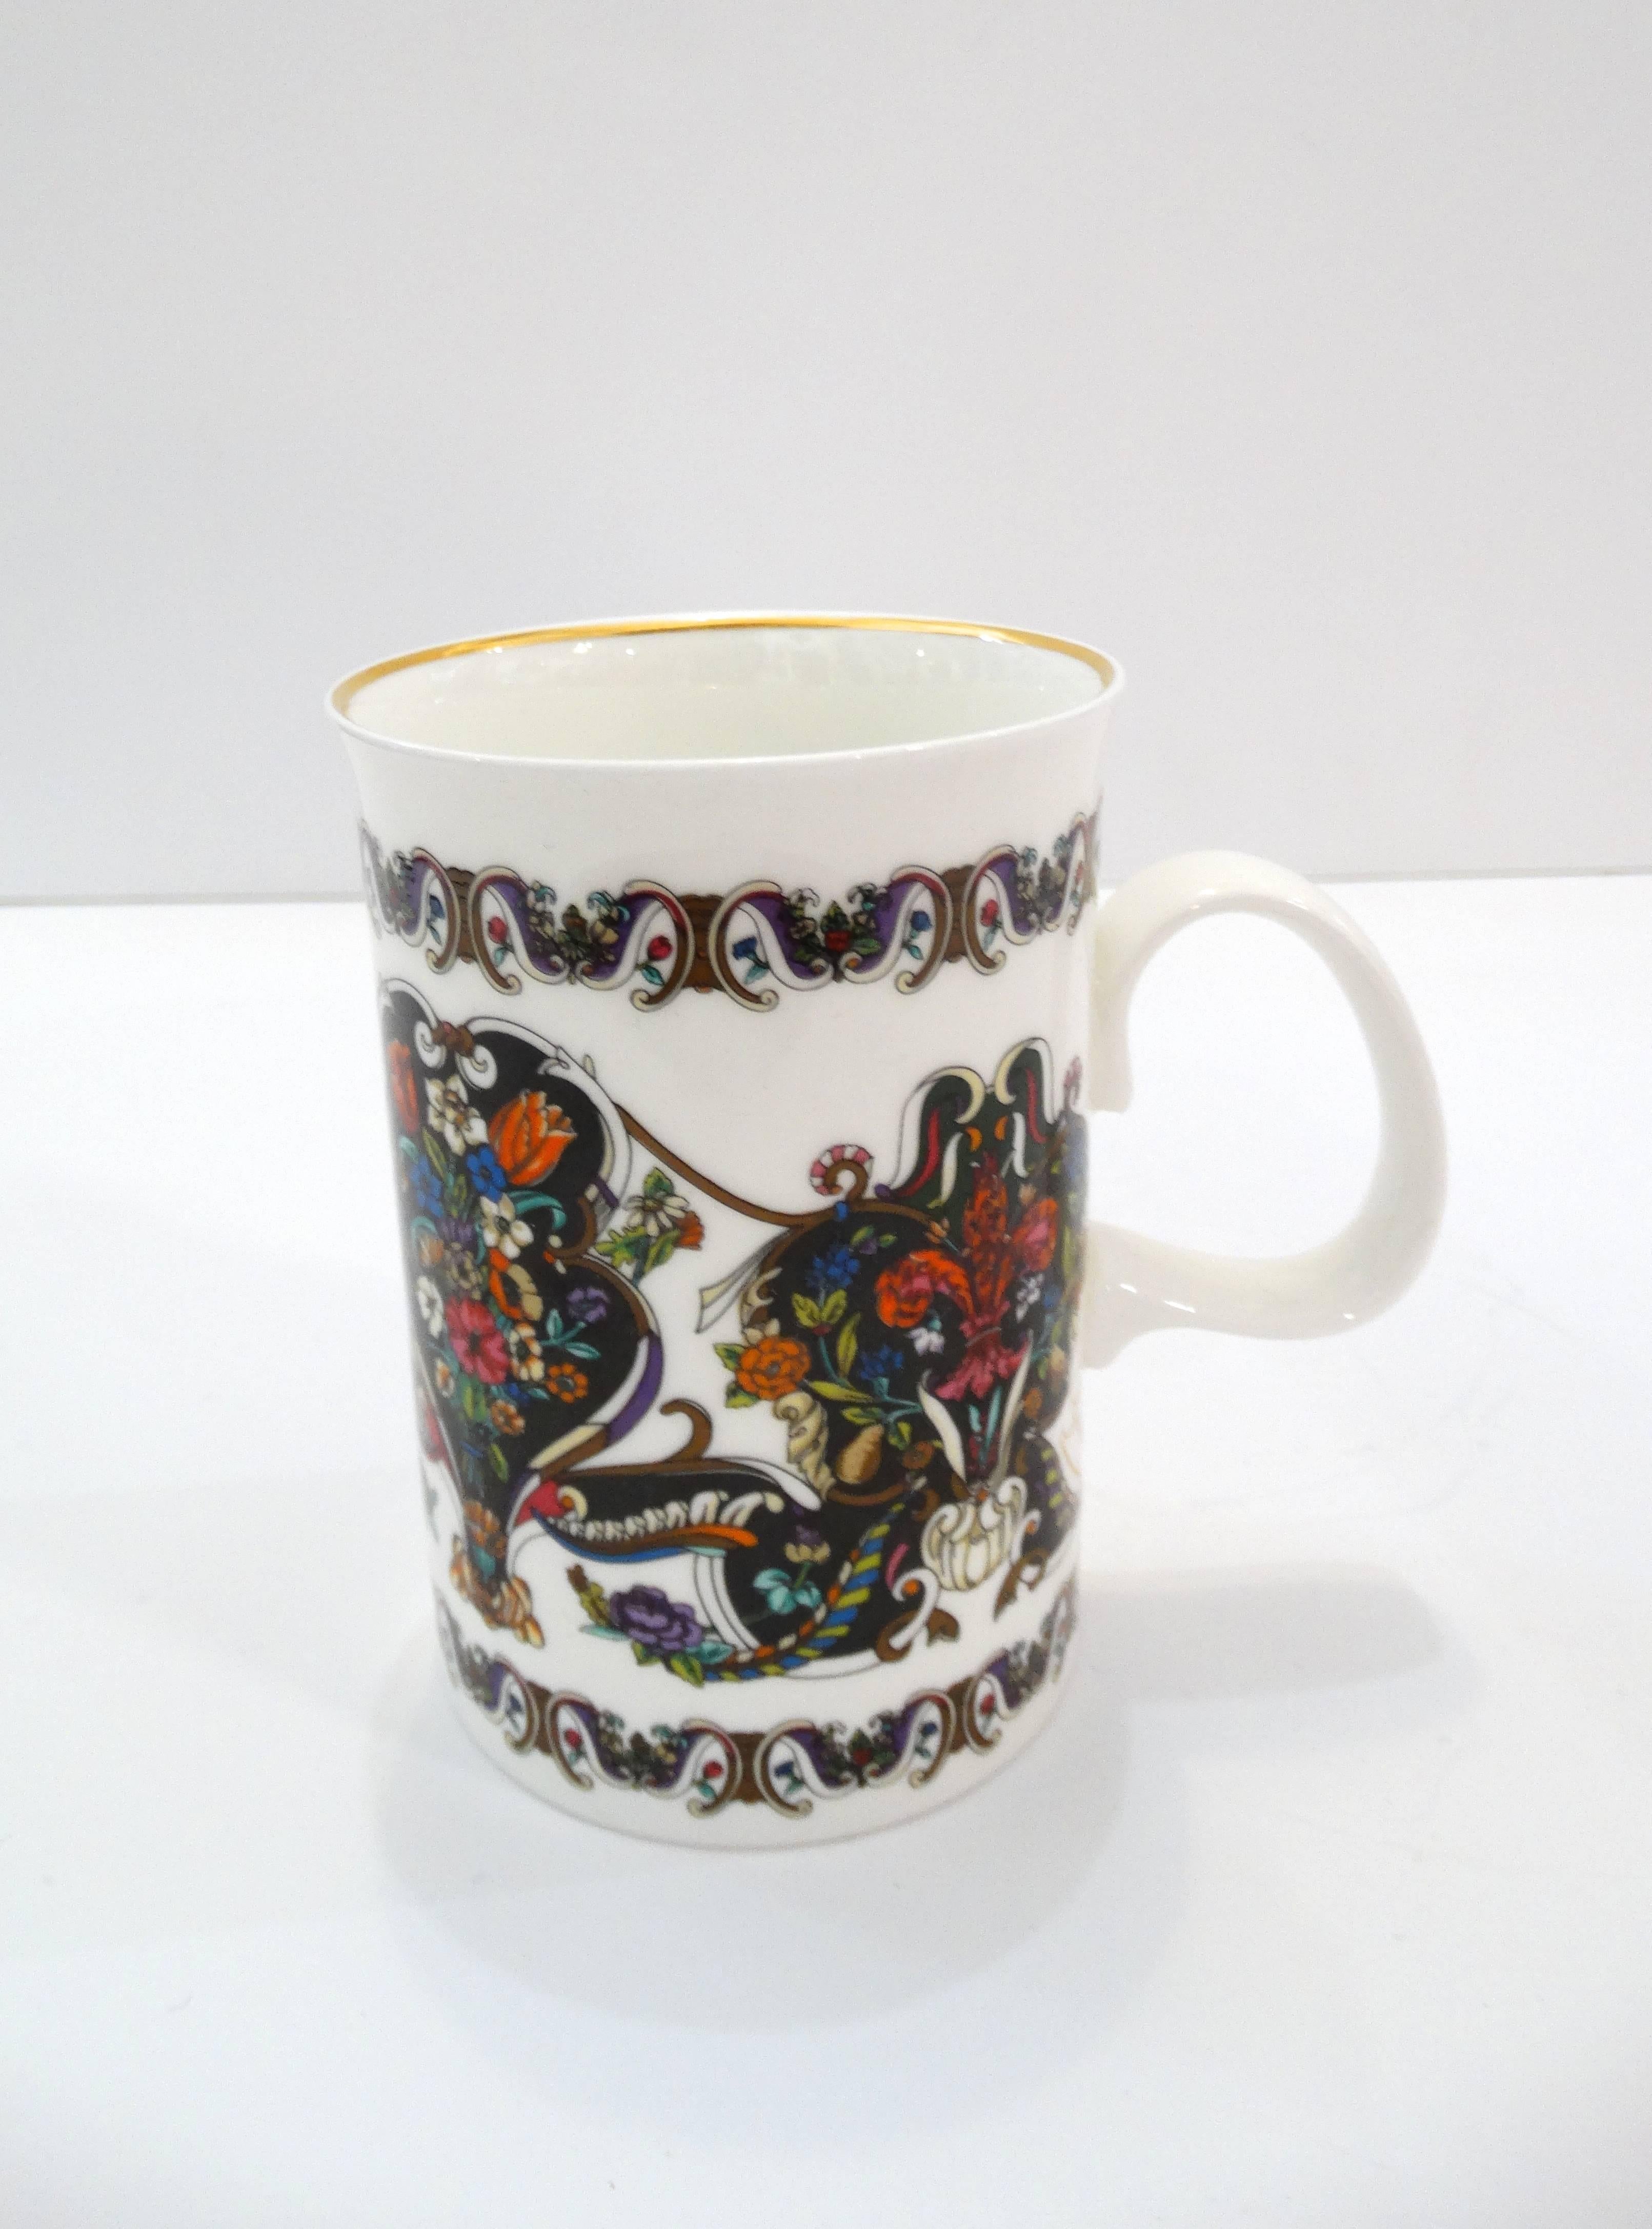 It's not enough to just wear Gucci- you have to drink Gucci too! Sip in style with our Gucci China set! 6 white china mugs with botanical gucci designs on each. Green velveteen lined box in the signature gucci green color. Closure slightly damaged,